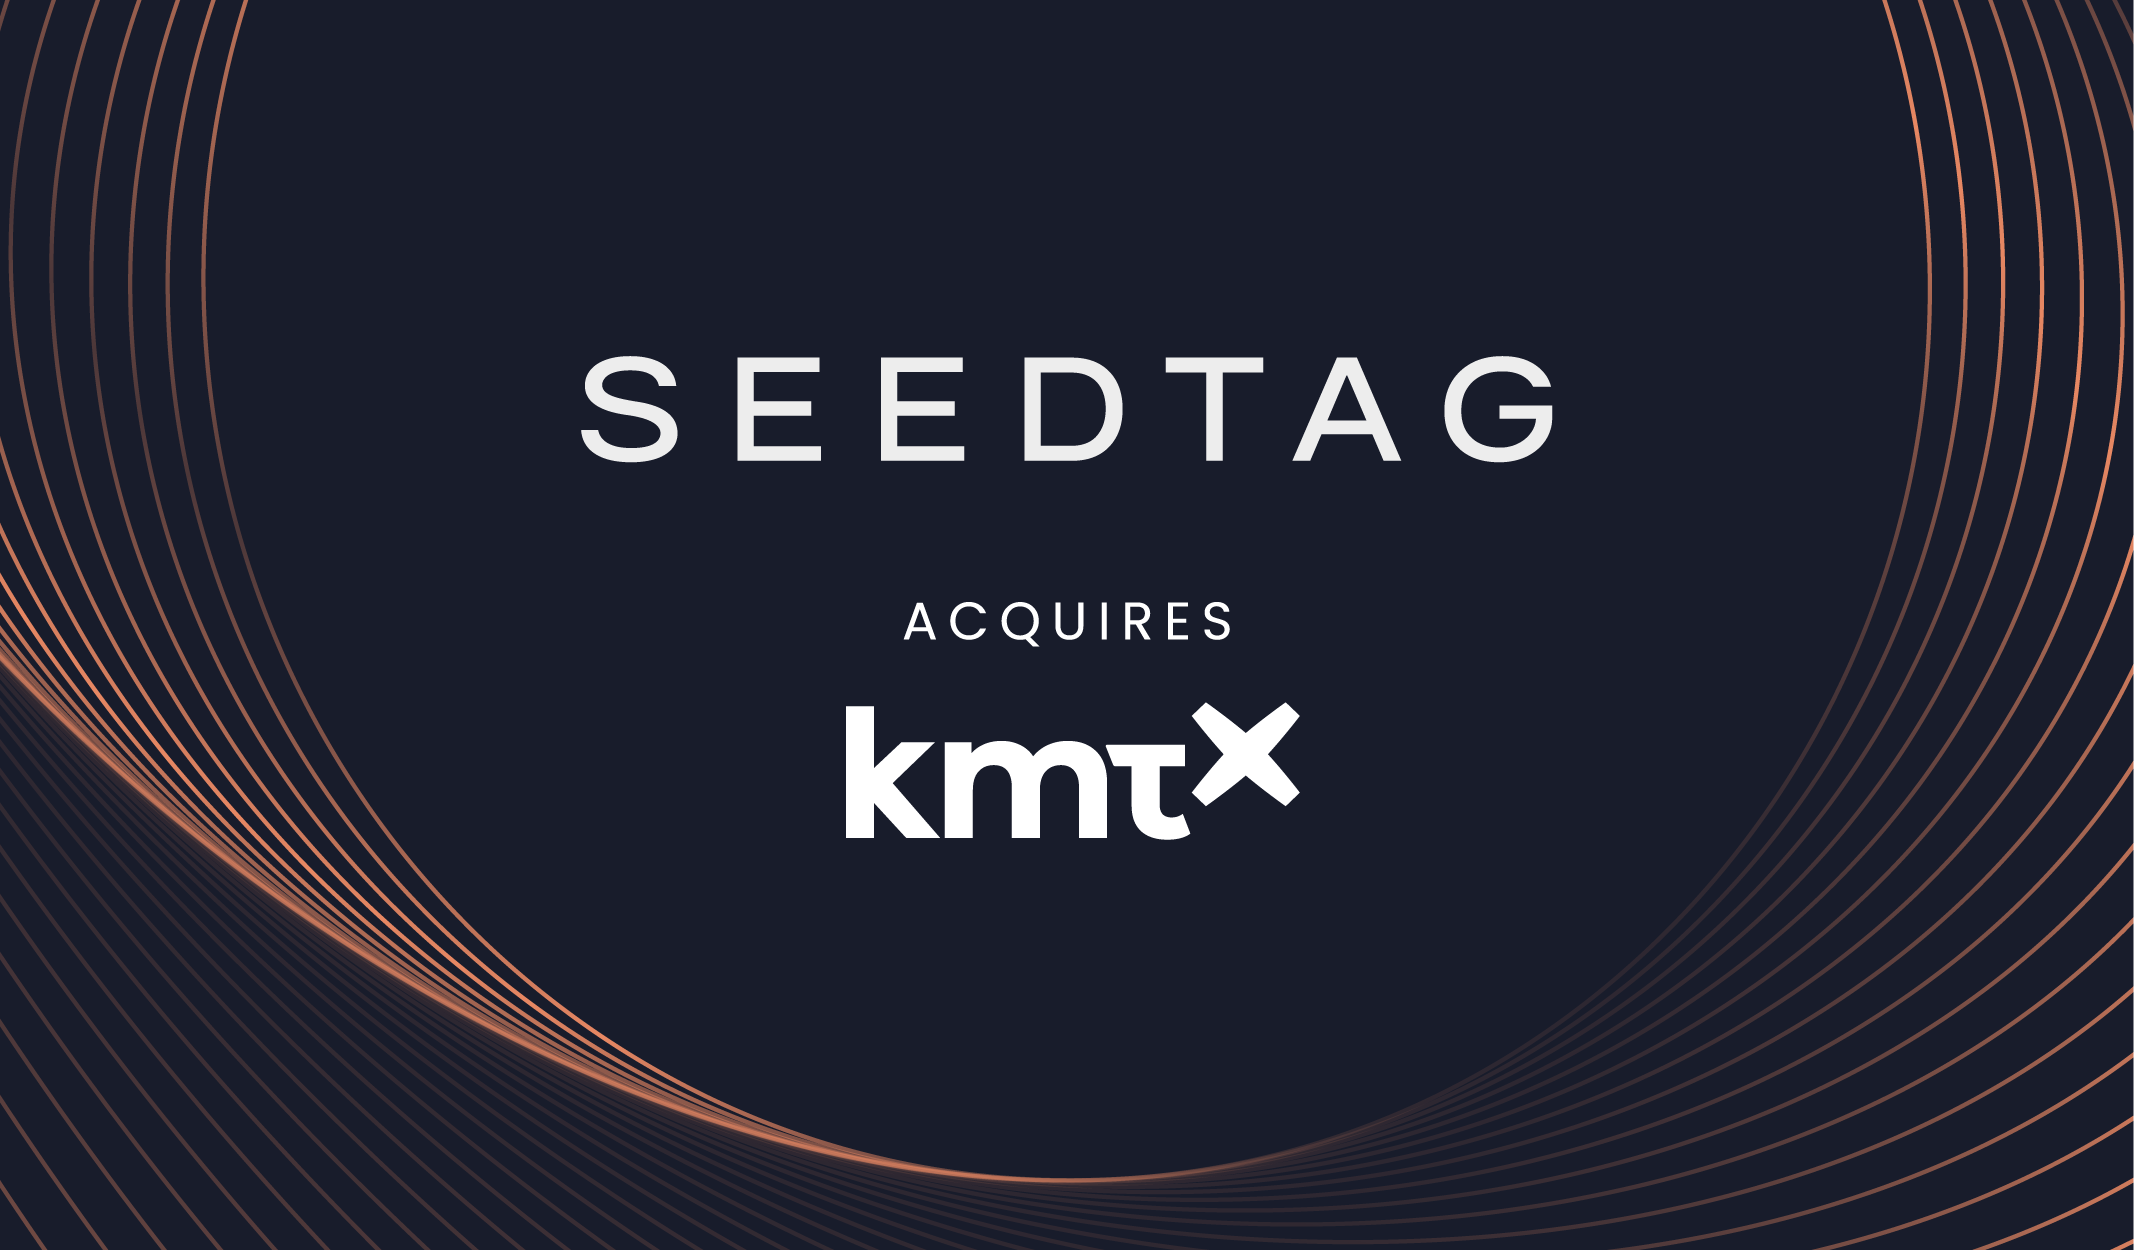 Seedtag acquires KMTX in a strategic step to power contextual performance for advertisers